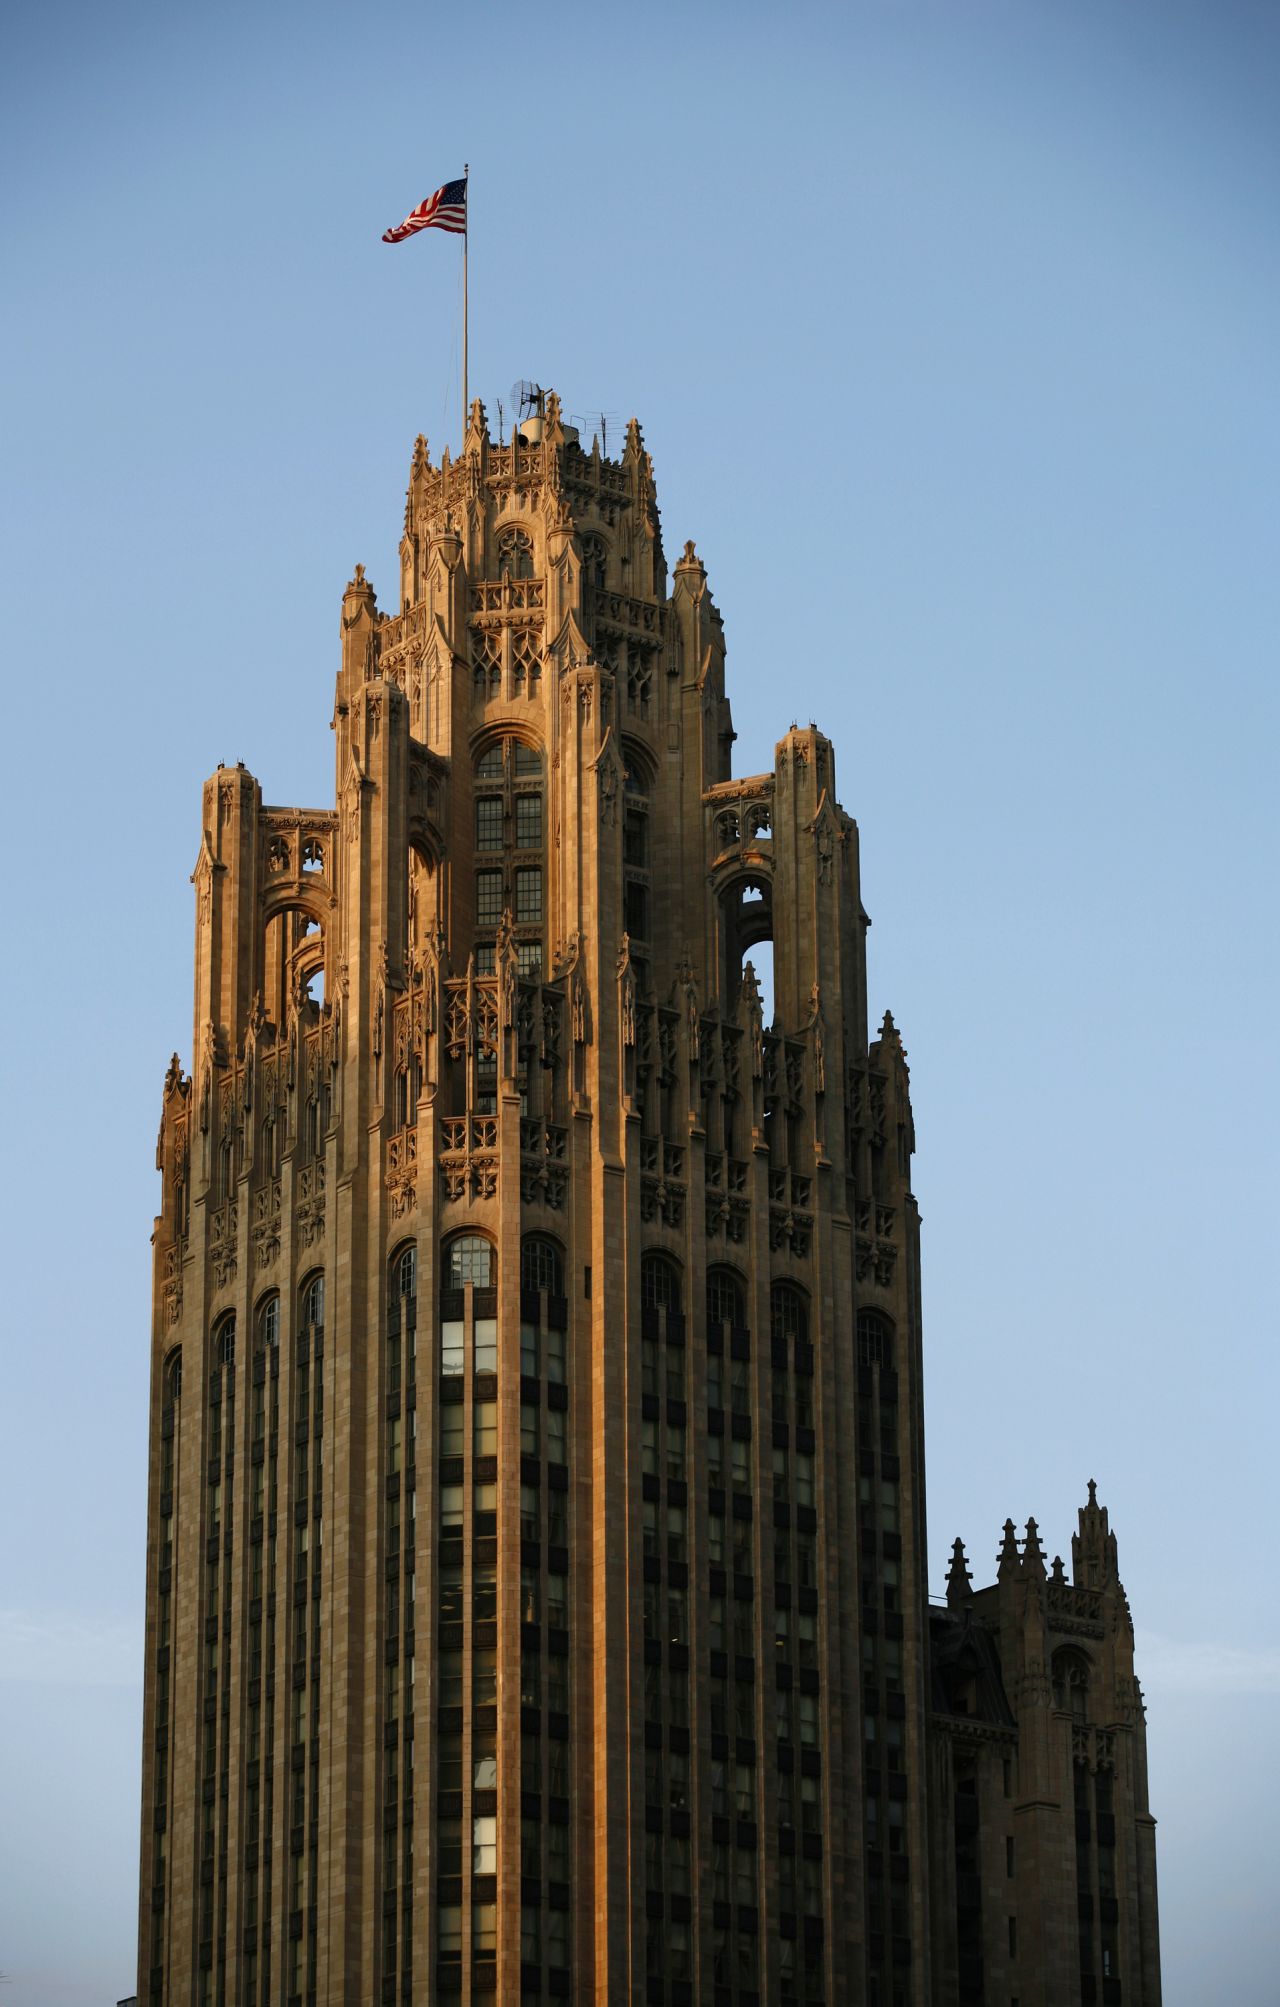 <strong>Tribune Tower, Chicago: </strong>The Gothic Revival Tribune Tower was completed in 1925.